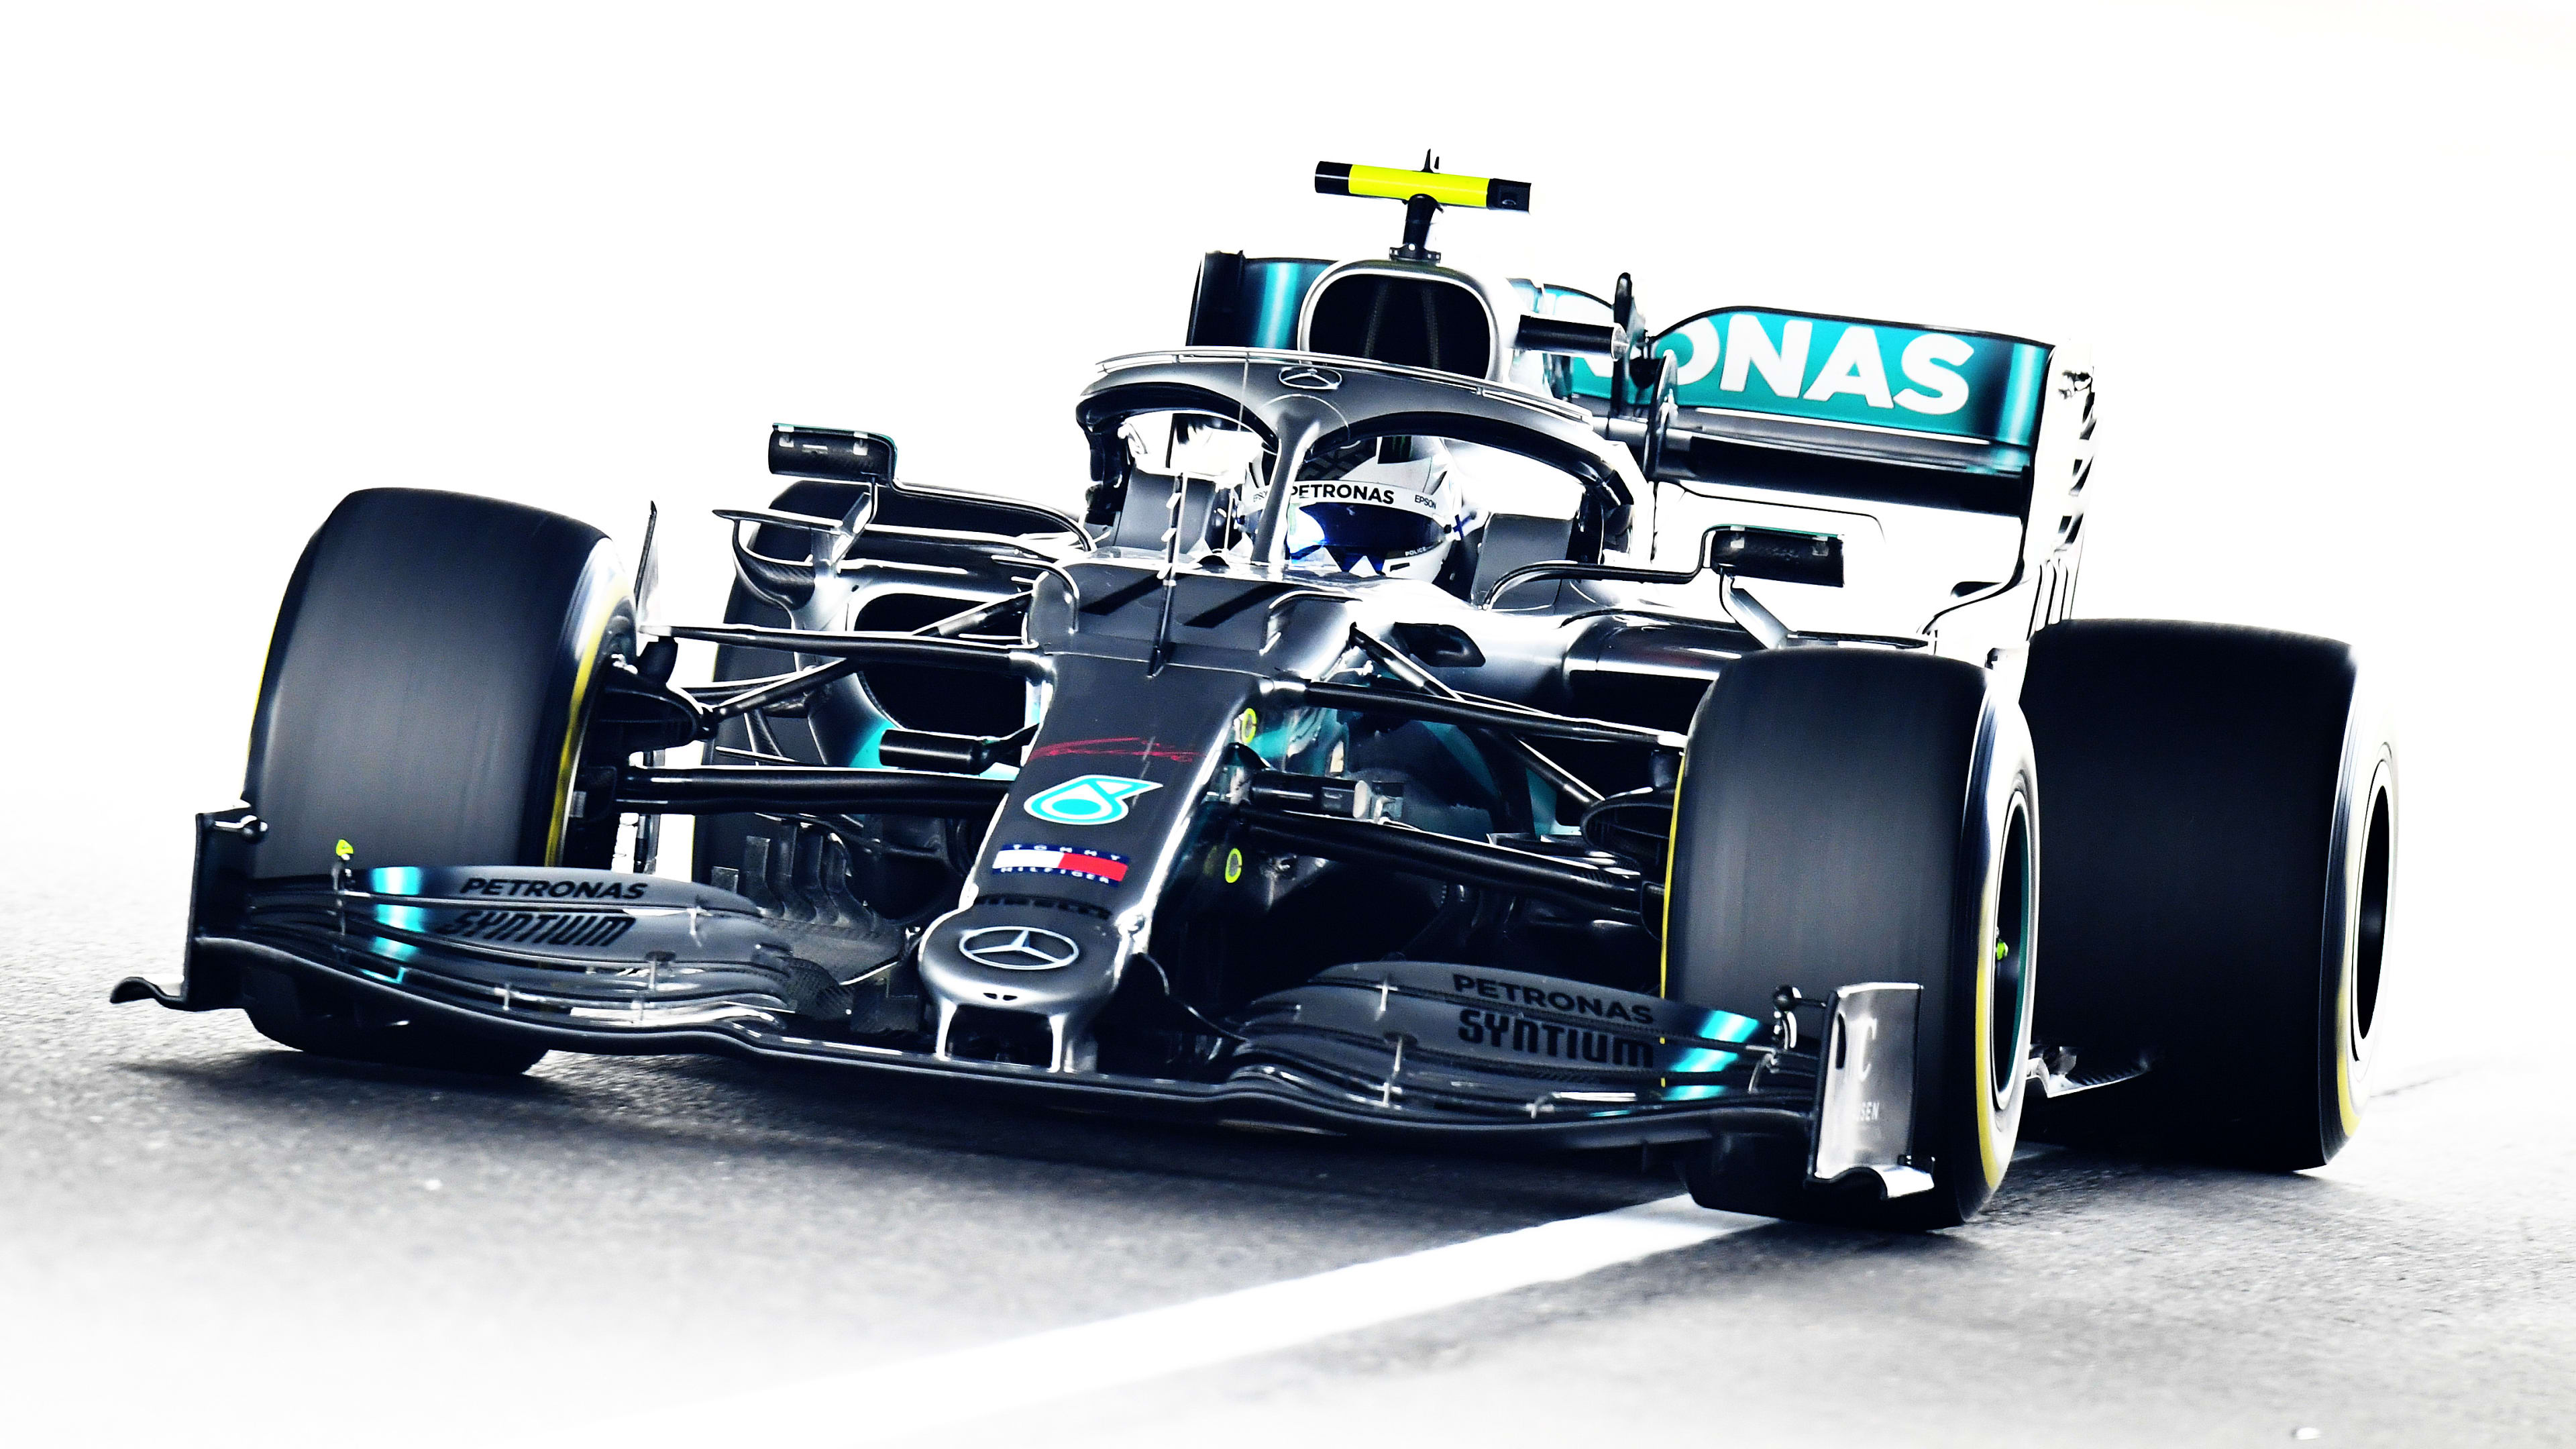 Japanese Grand Prix 2019 FP1 report and video highlights Bottas leads Mercedes 1-2 in opening Suzuka session Formula 1®